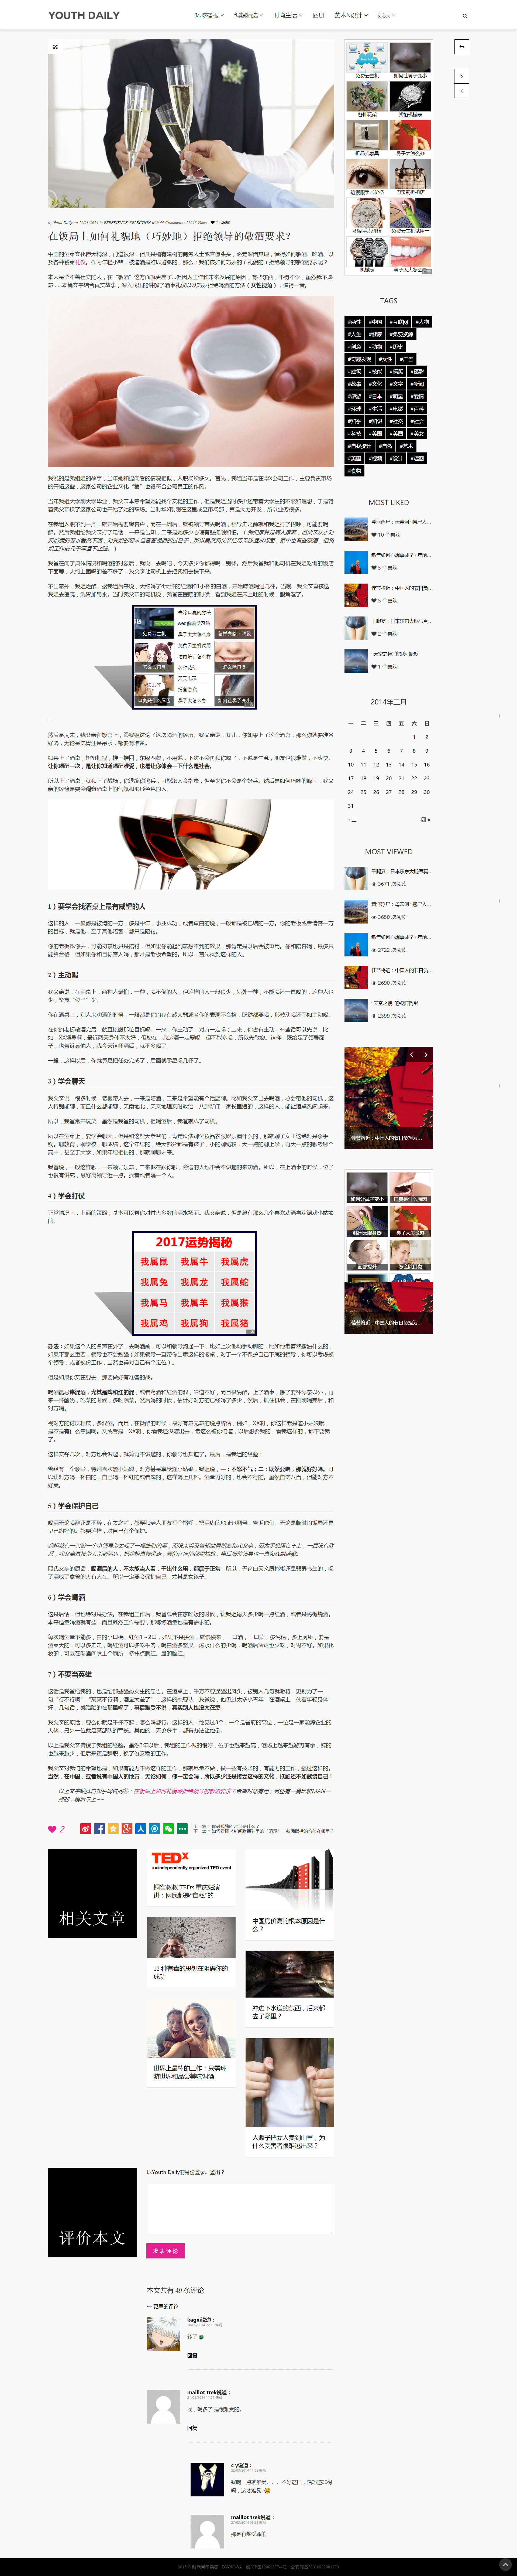 screencapture-youth-daily-2014-03-learn-how-to-say-no-singlepage-full